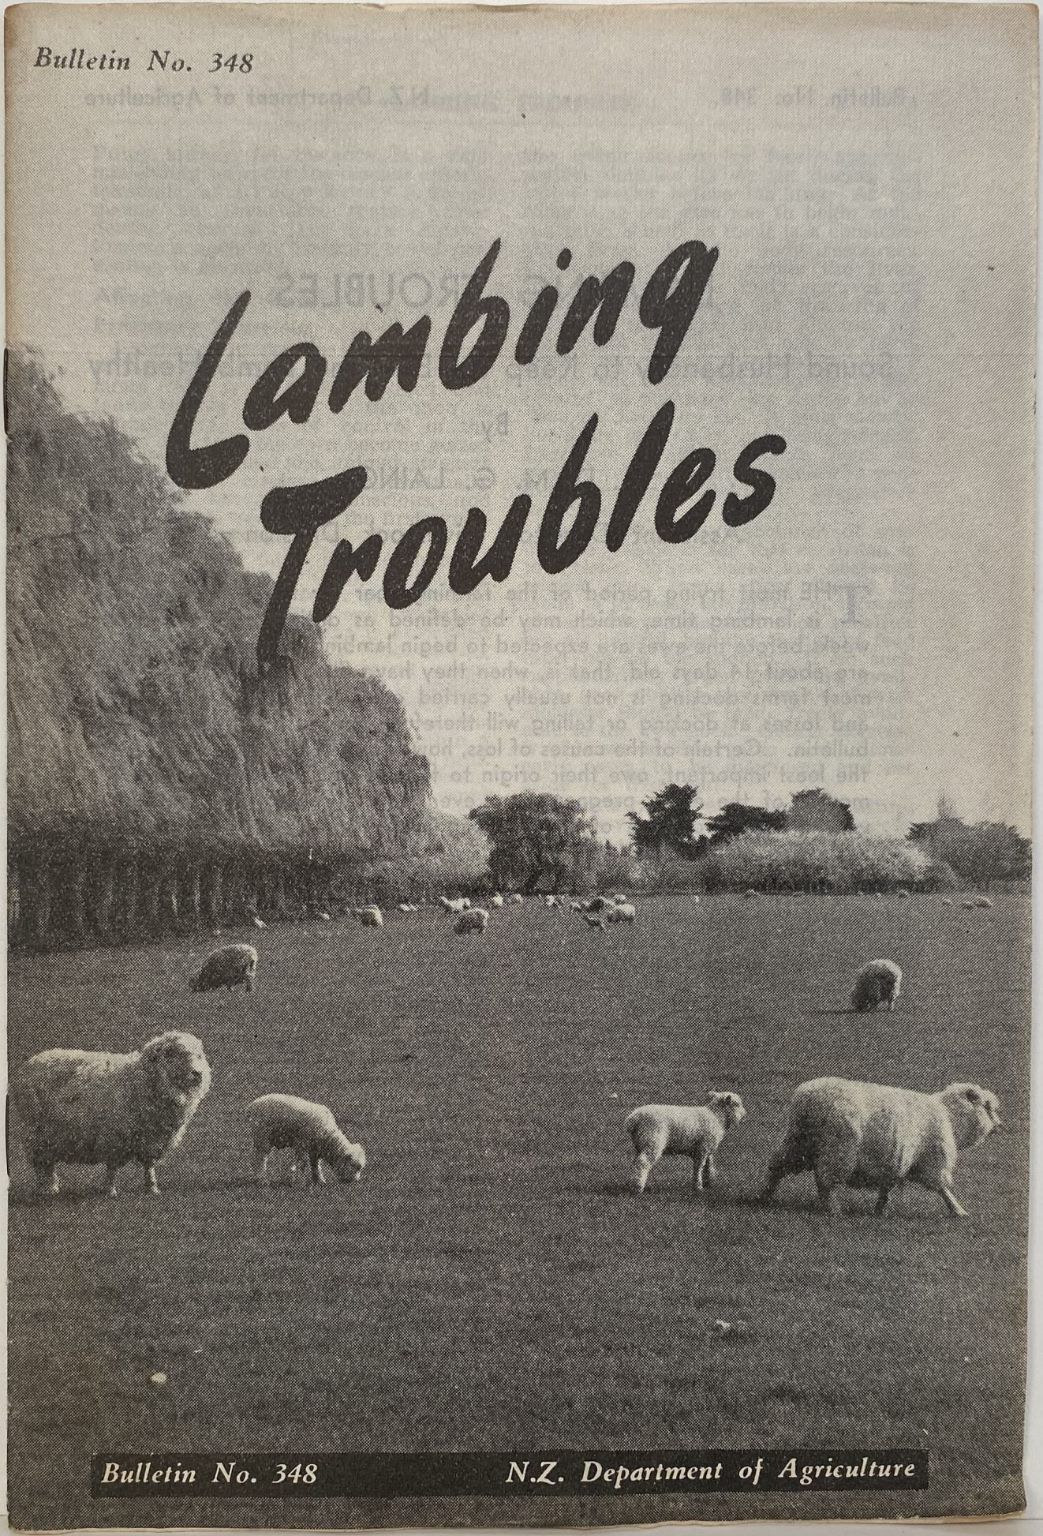 LAMBING TROUBLES: Sound Husbandry to Keep the Ewe and Lamb Healthy: Bulletin No. 348